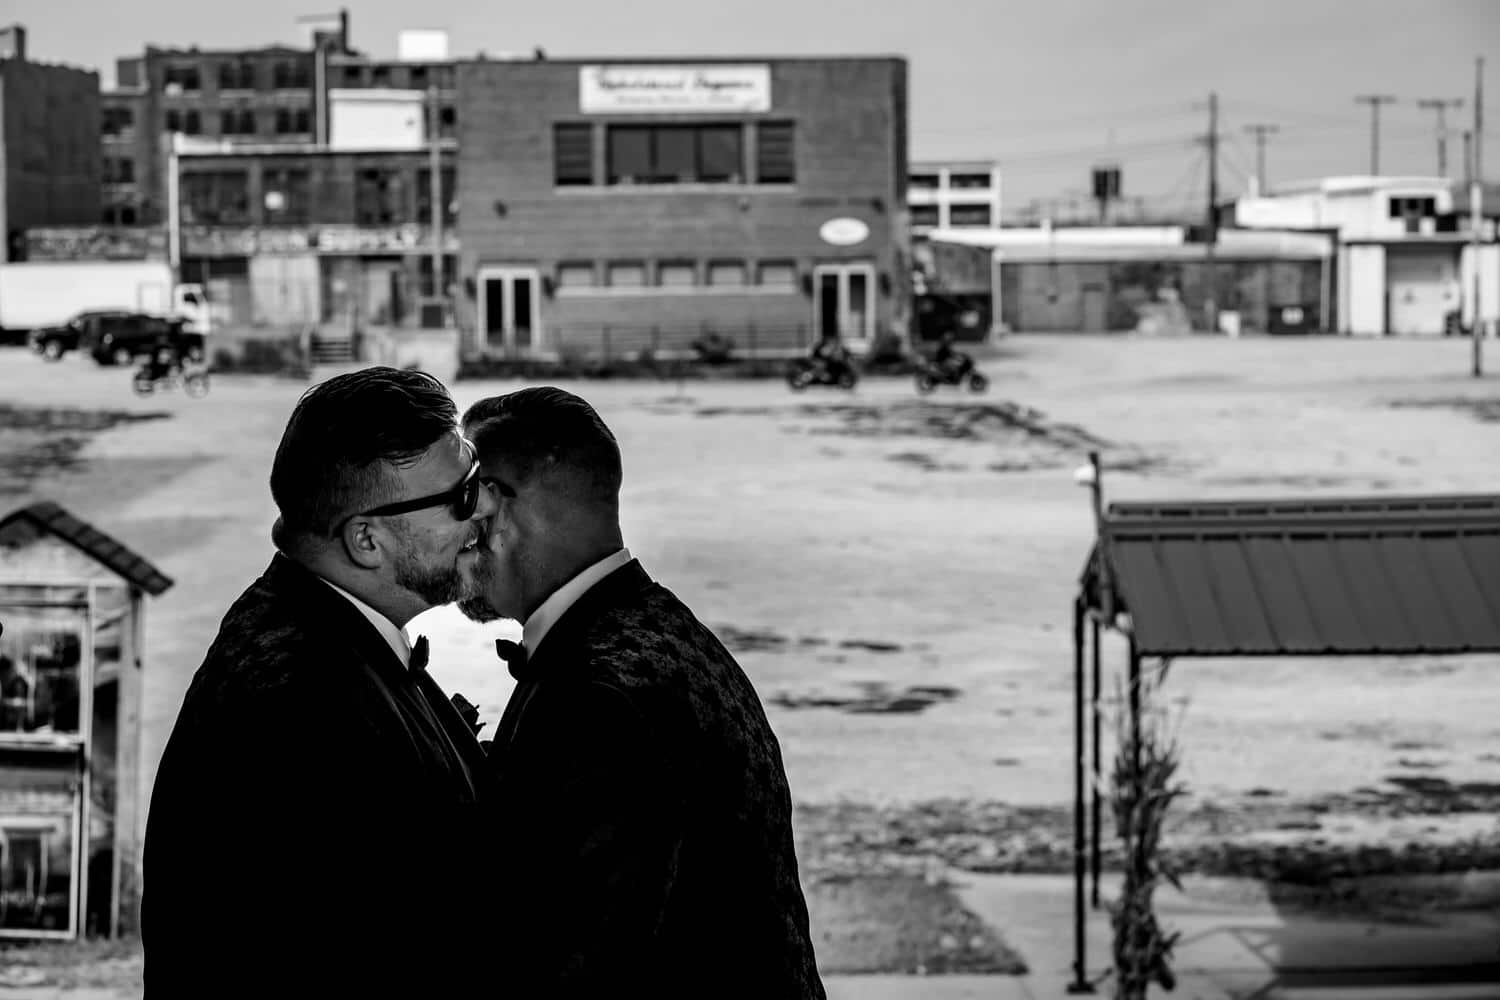 A candid black and white picture of a groom laughing and whispering into his groom's ear, Kansas City's West Bottoms neighborhood visible behind them. 